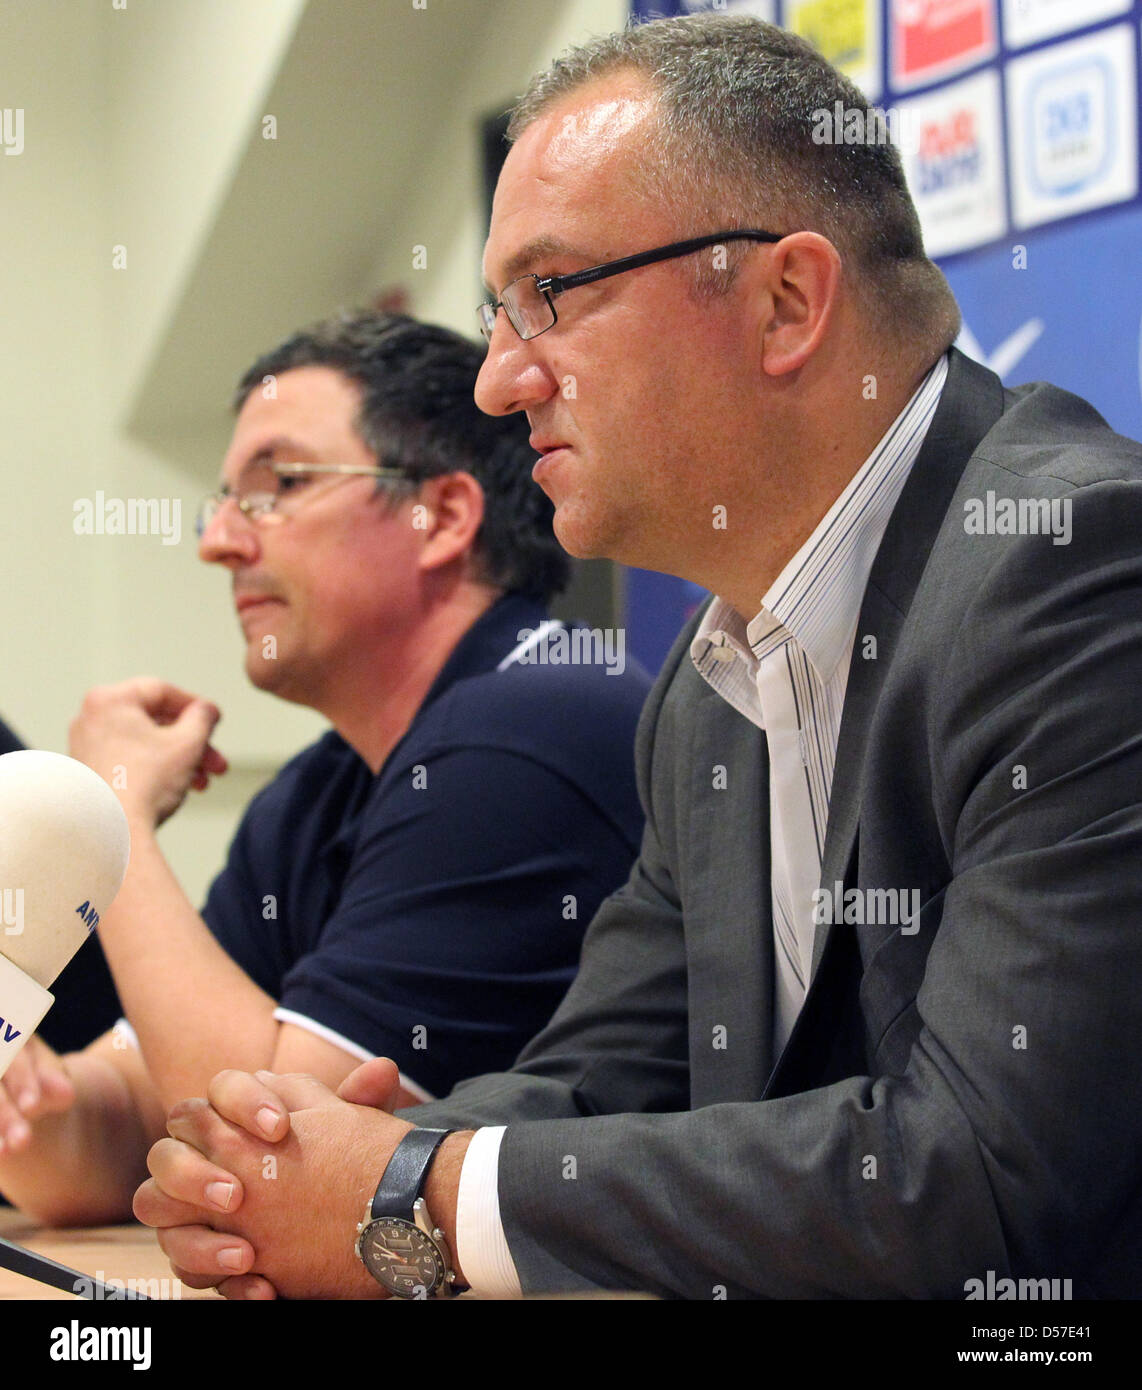 The chairman of German Bundesliga second division soccer club FC Hansa Rostock, Joerg Hempel (R), and the member of the supervisory board Torsten Voelker (L) give a press conference in Rostock, Germany, 10 May 2010. The two apologised for violence by Rostock supporters during the club's away match in Duesseldorf and vowed to increase efforst against violence. Cameramen and policeme Stock Photo